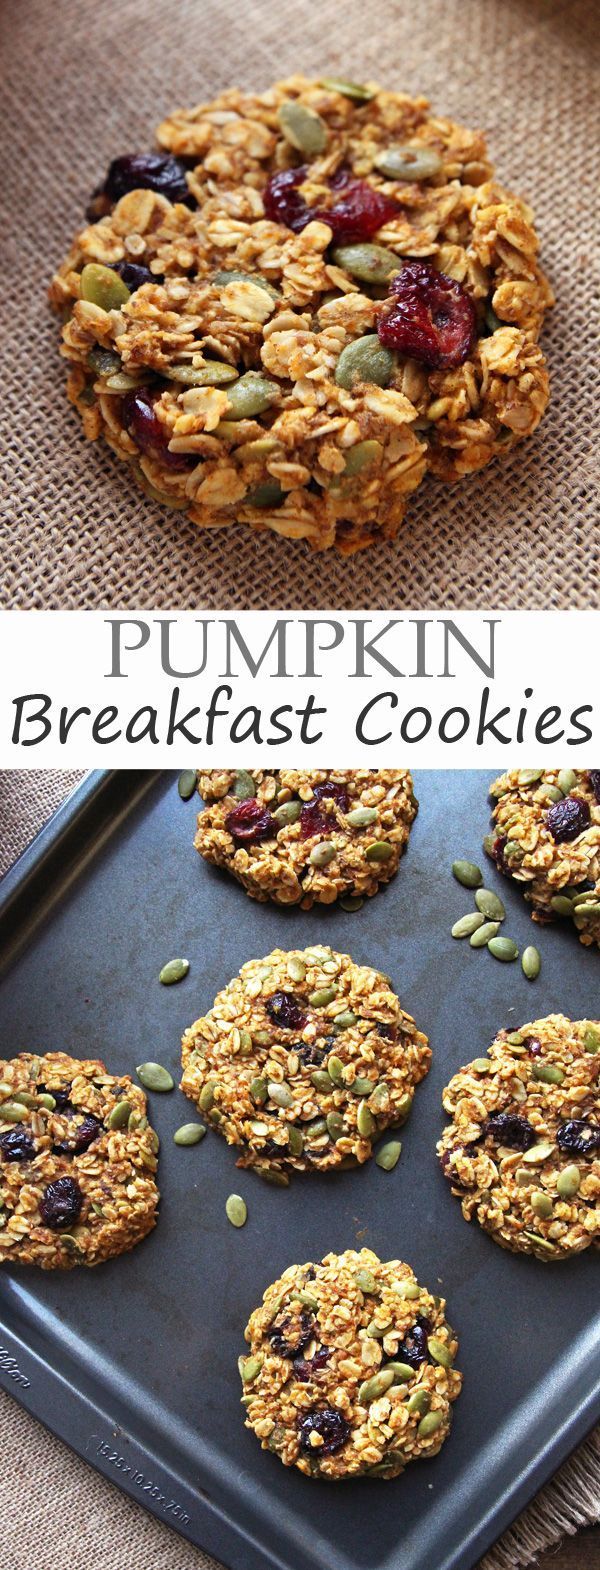 Pumpkin Breakfast Cookies drive home the fall flavor with pumpkin seeds and dried cranberries. They are GF, refined sugar-free